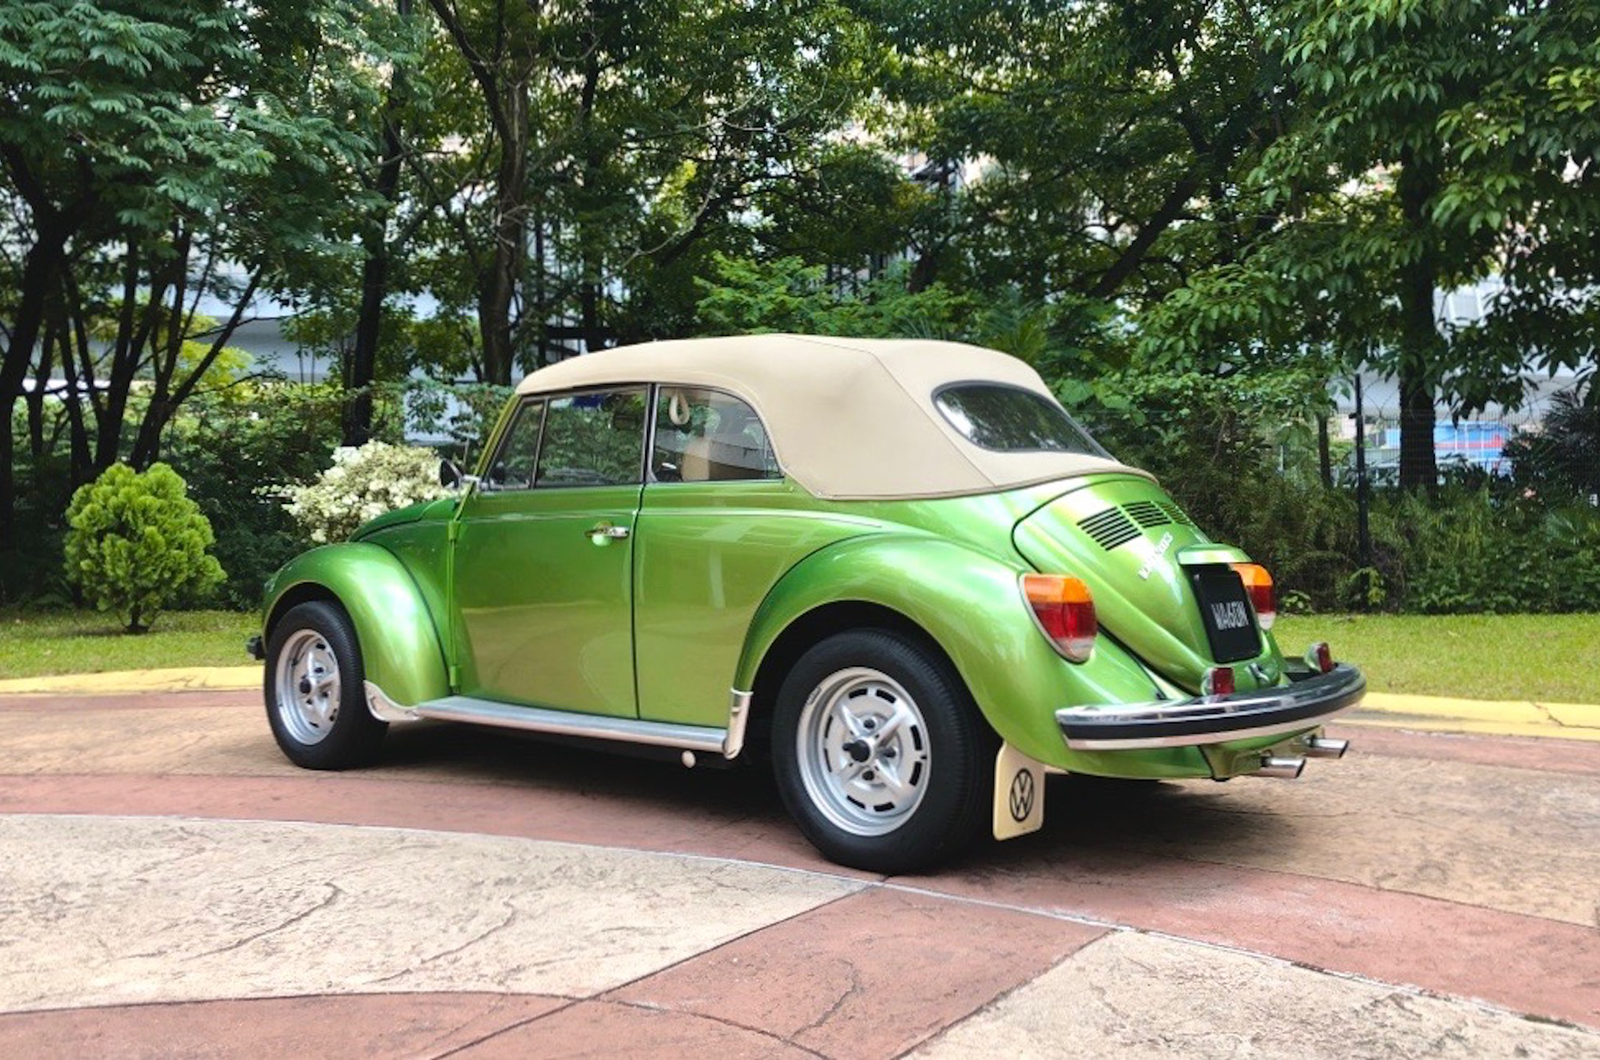 Classic & Sports Car – Who’s next for this ex-Roger Daltrey classic Beetle?